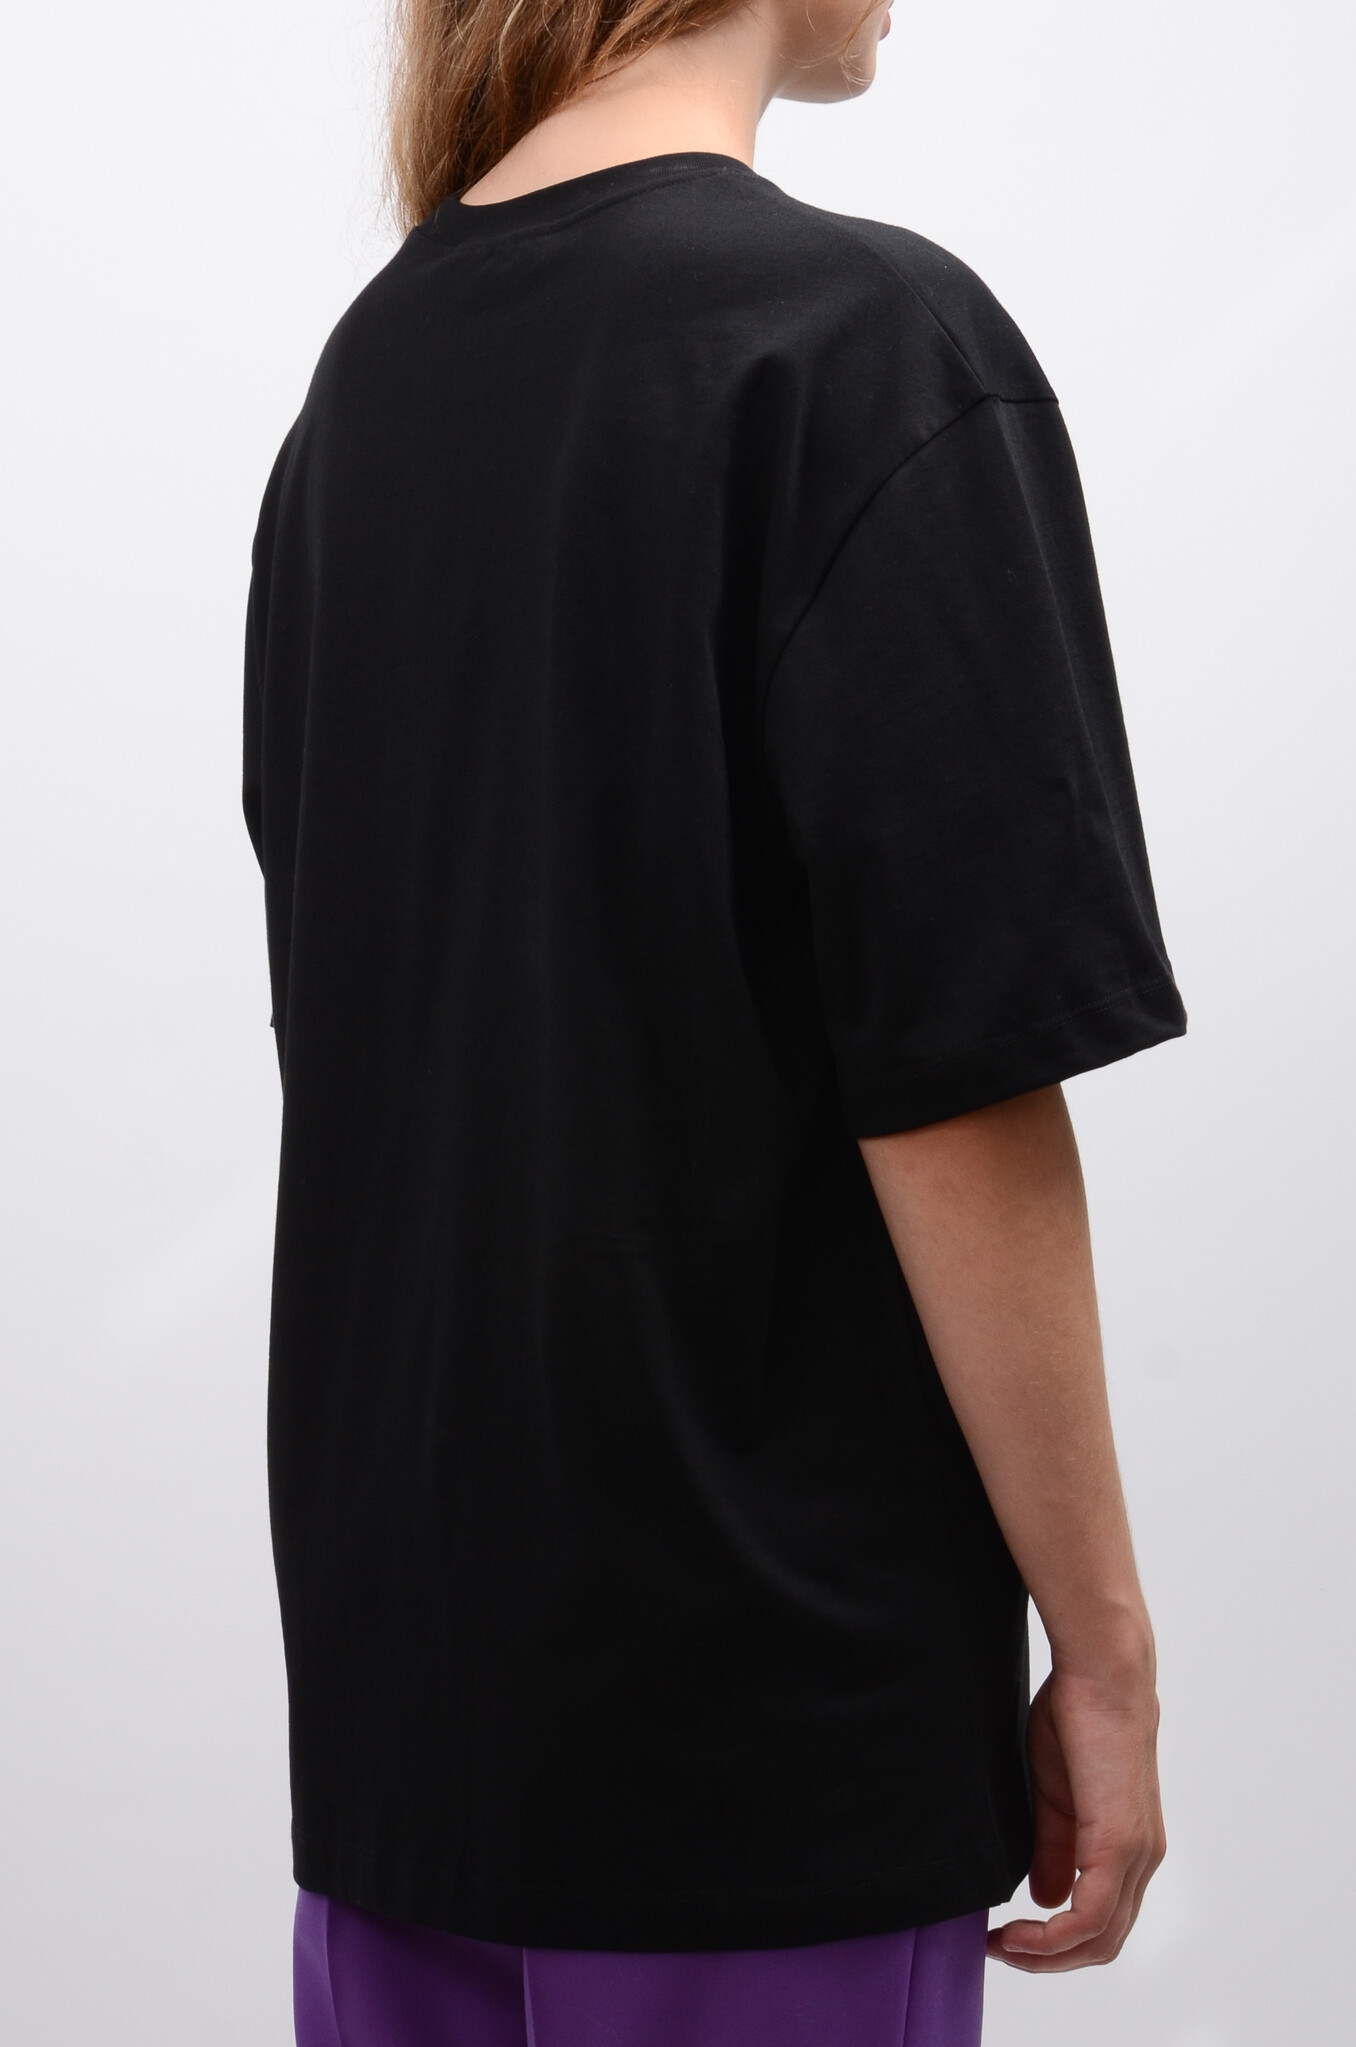 Graphic Print T-Shirt in Black-5